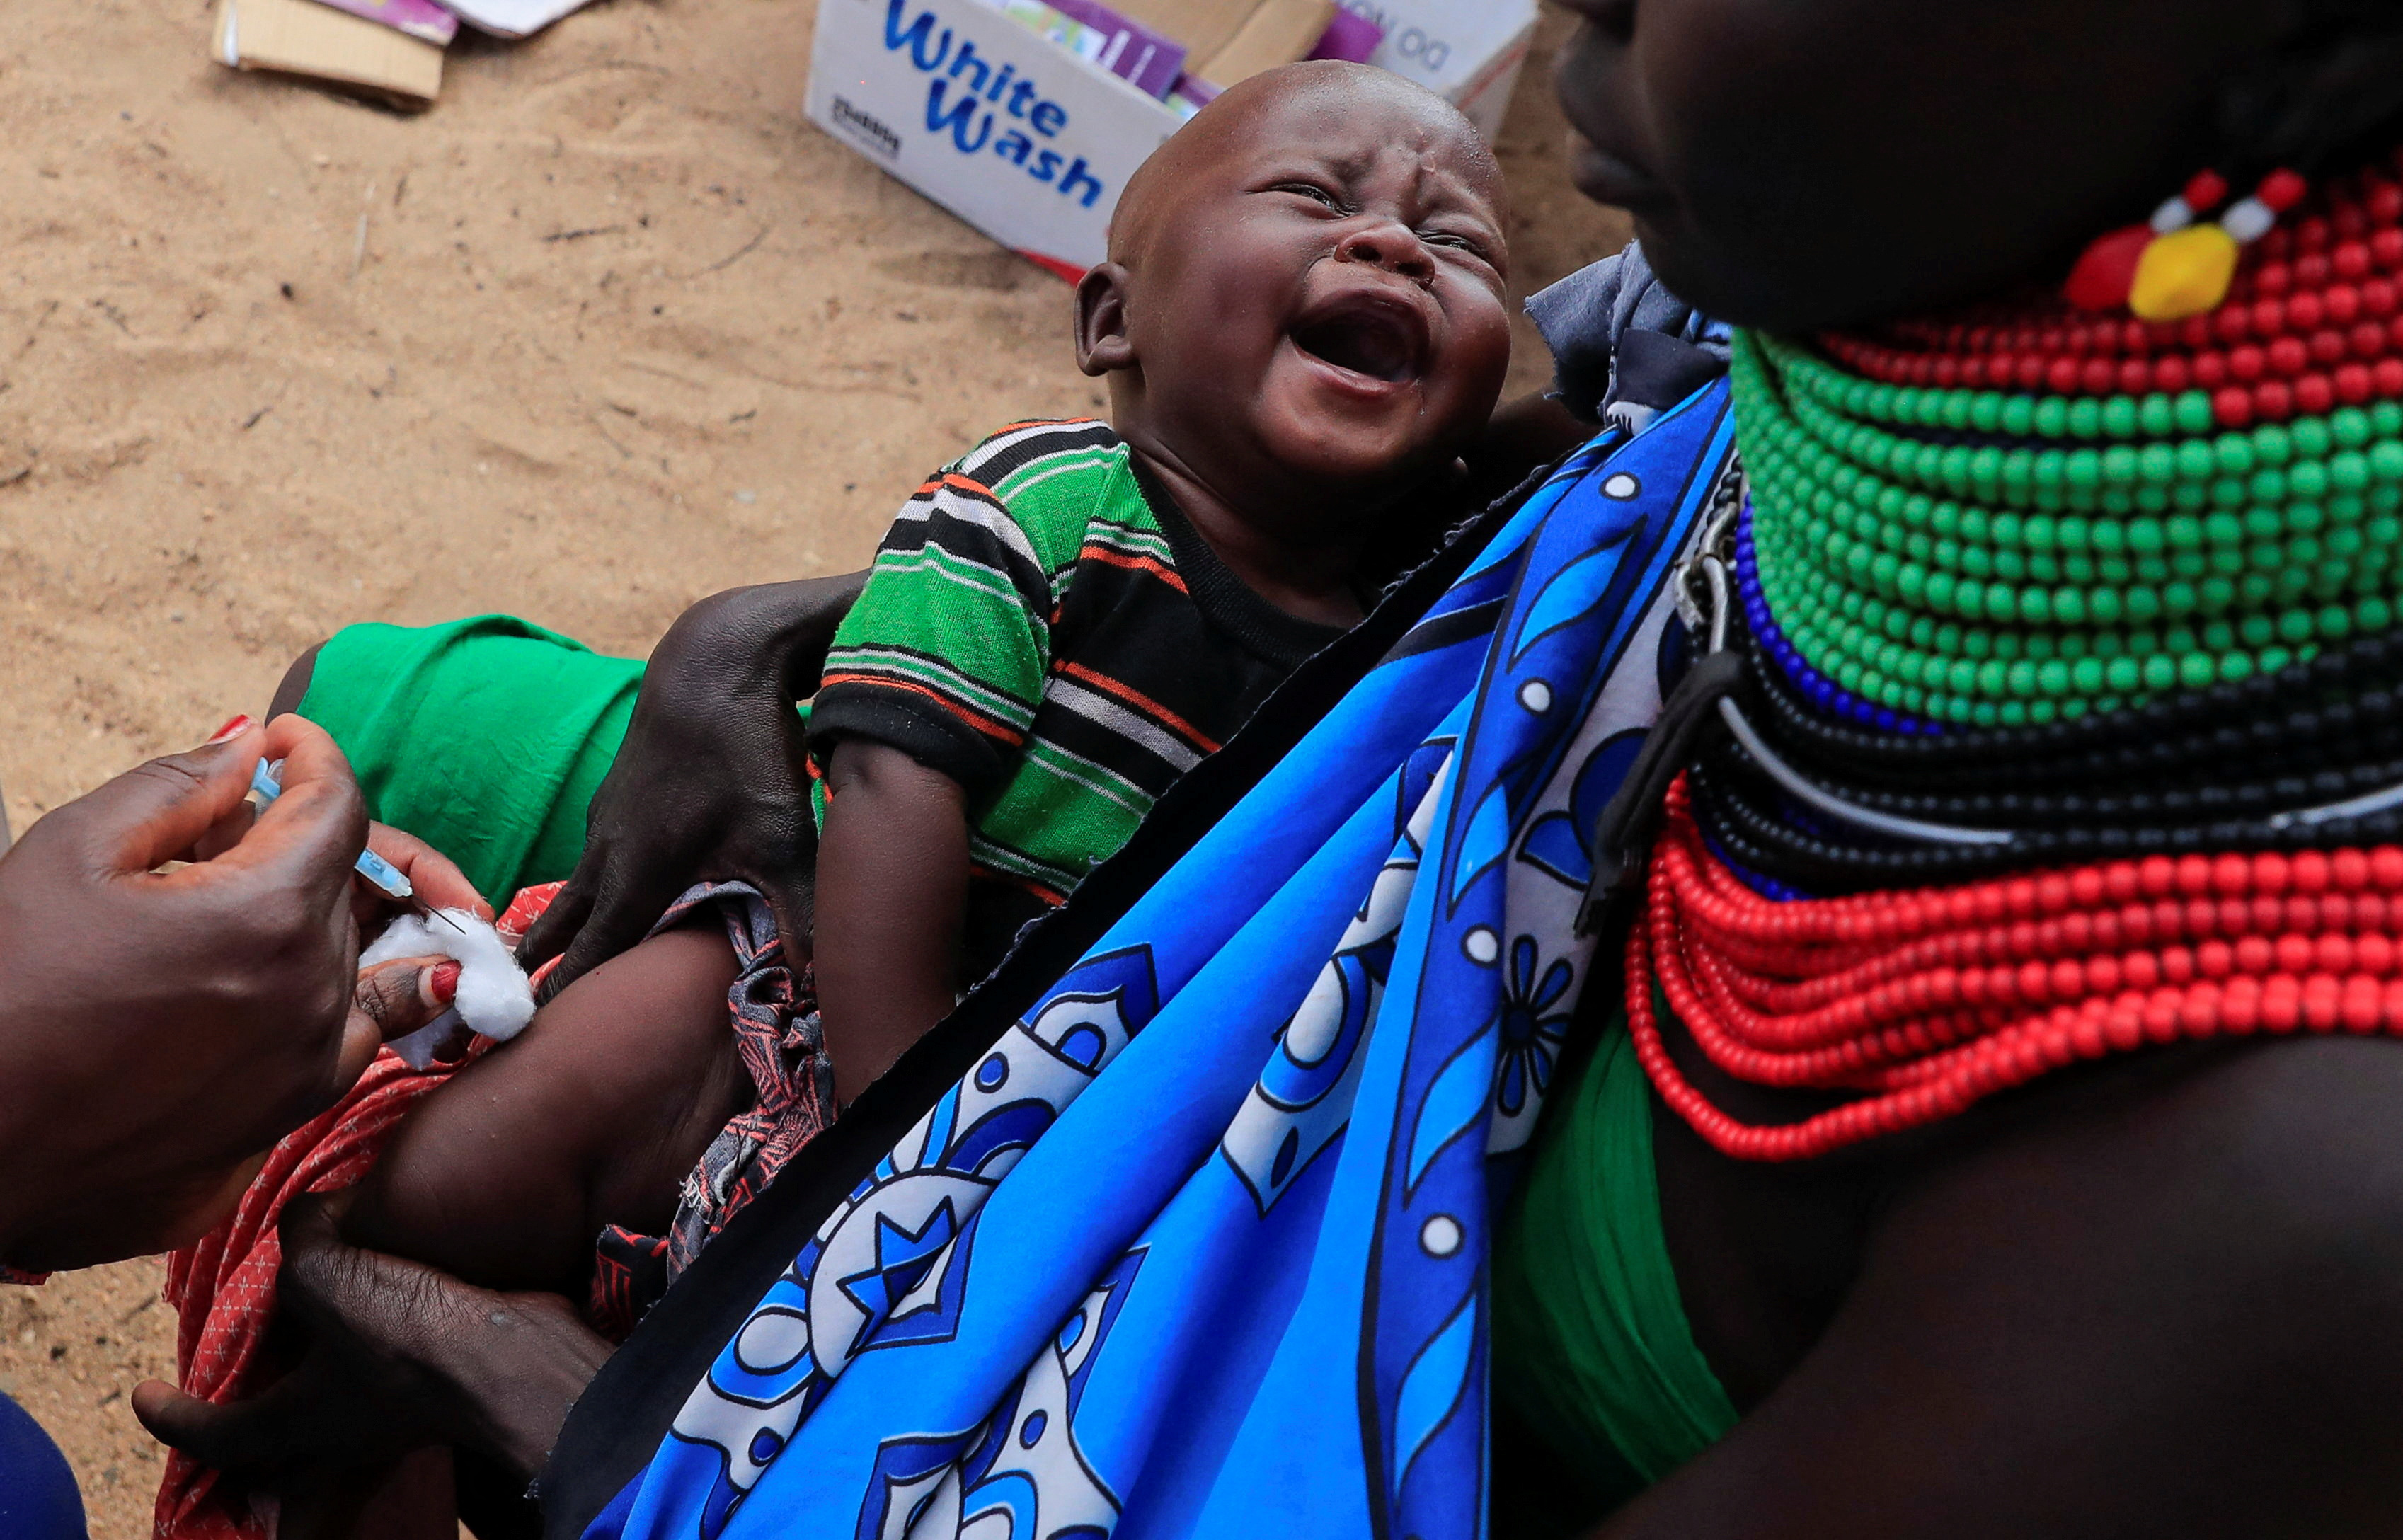 A child from the Turkana pastoralist community affected by the worsening drought due to failed rain seasons, gets a vaccine at an integrated outreach medical clinic in Kakimat village in Turkana